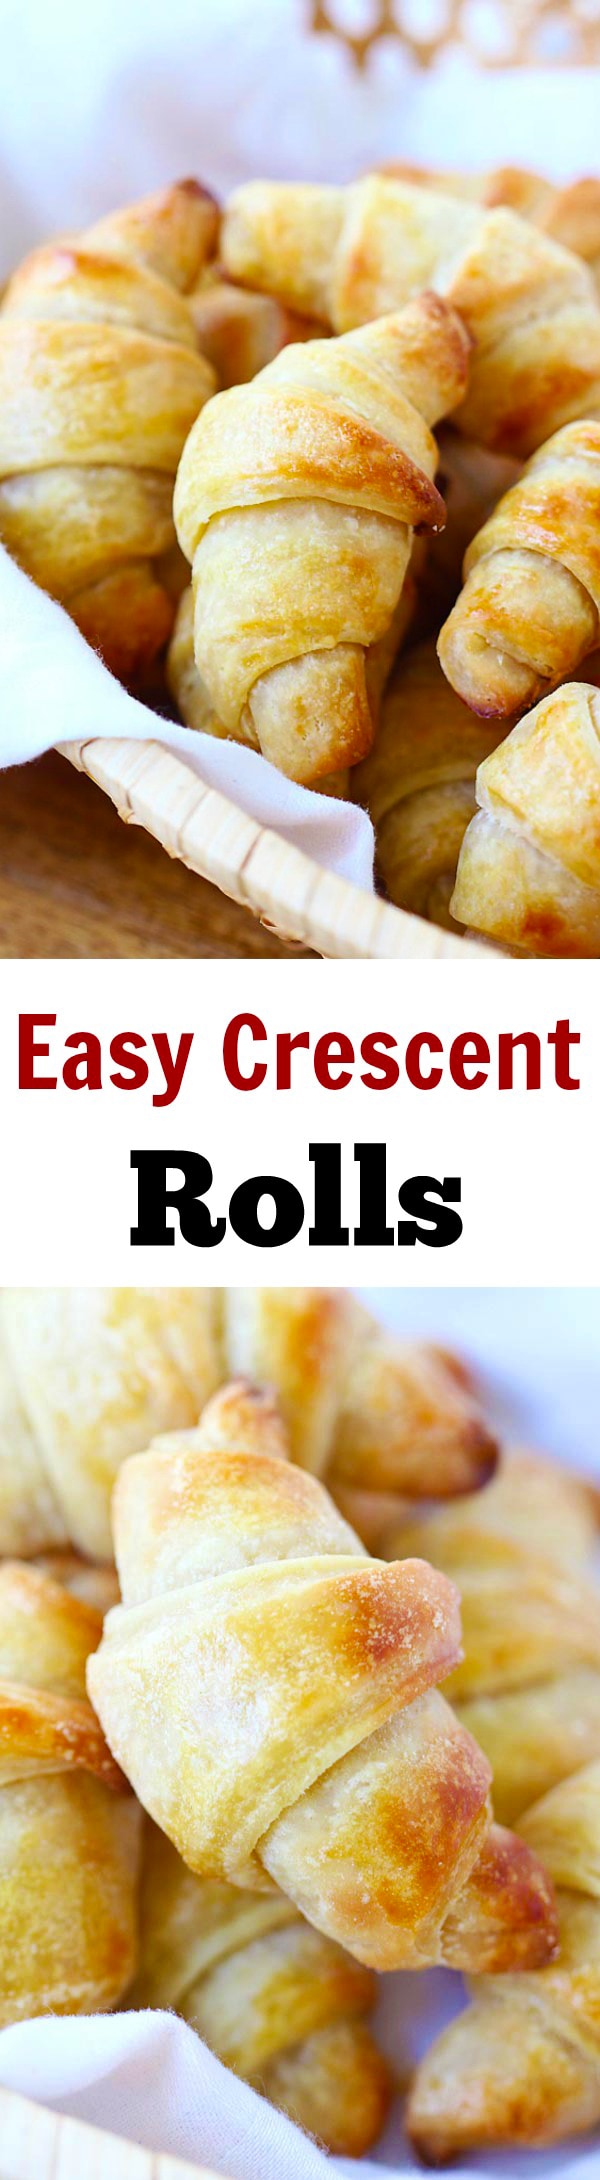 Crescent Rolls – Easy homemade crescent rolls recipe that anyone can make. Flaky, buttery, and fluffy, these rolls are the best!! | rasamalaysia.com